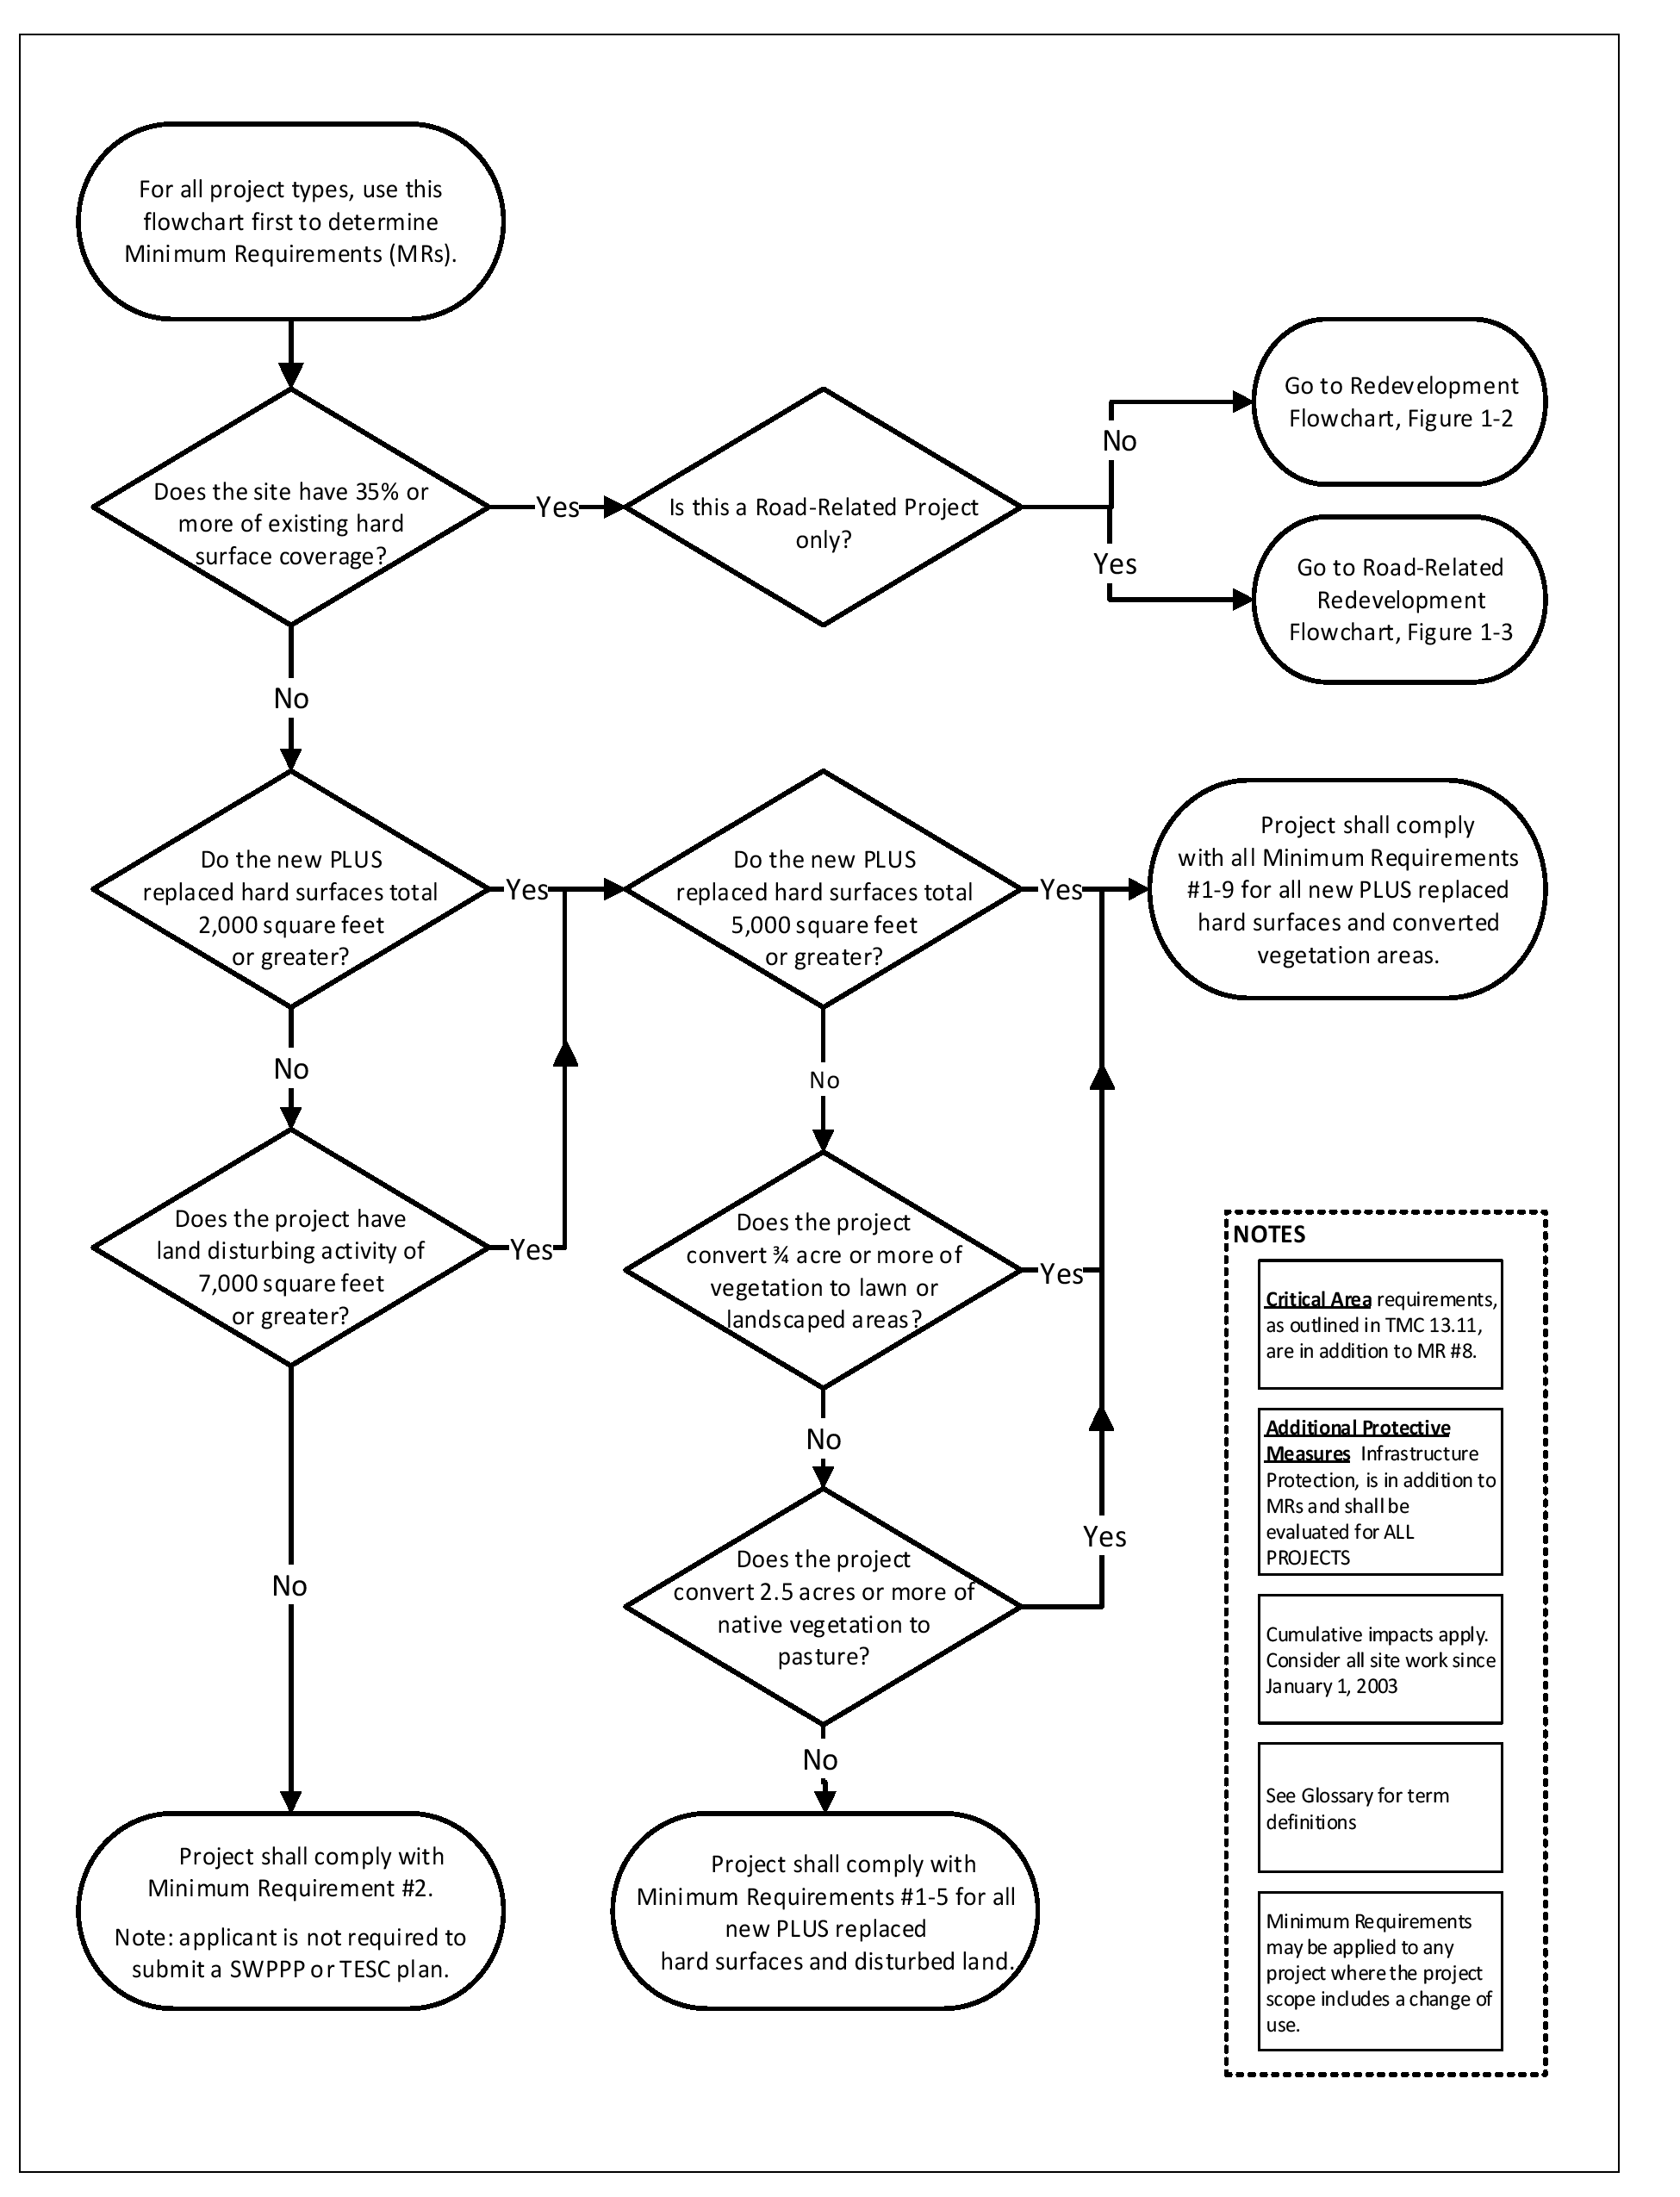 Figure 1-1 All Projects and New Development Flowcharts